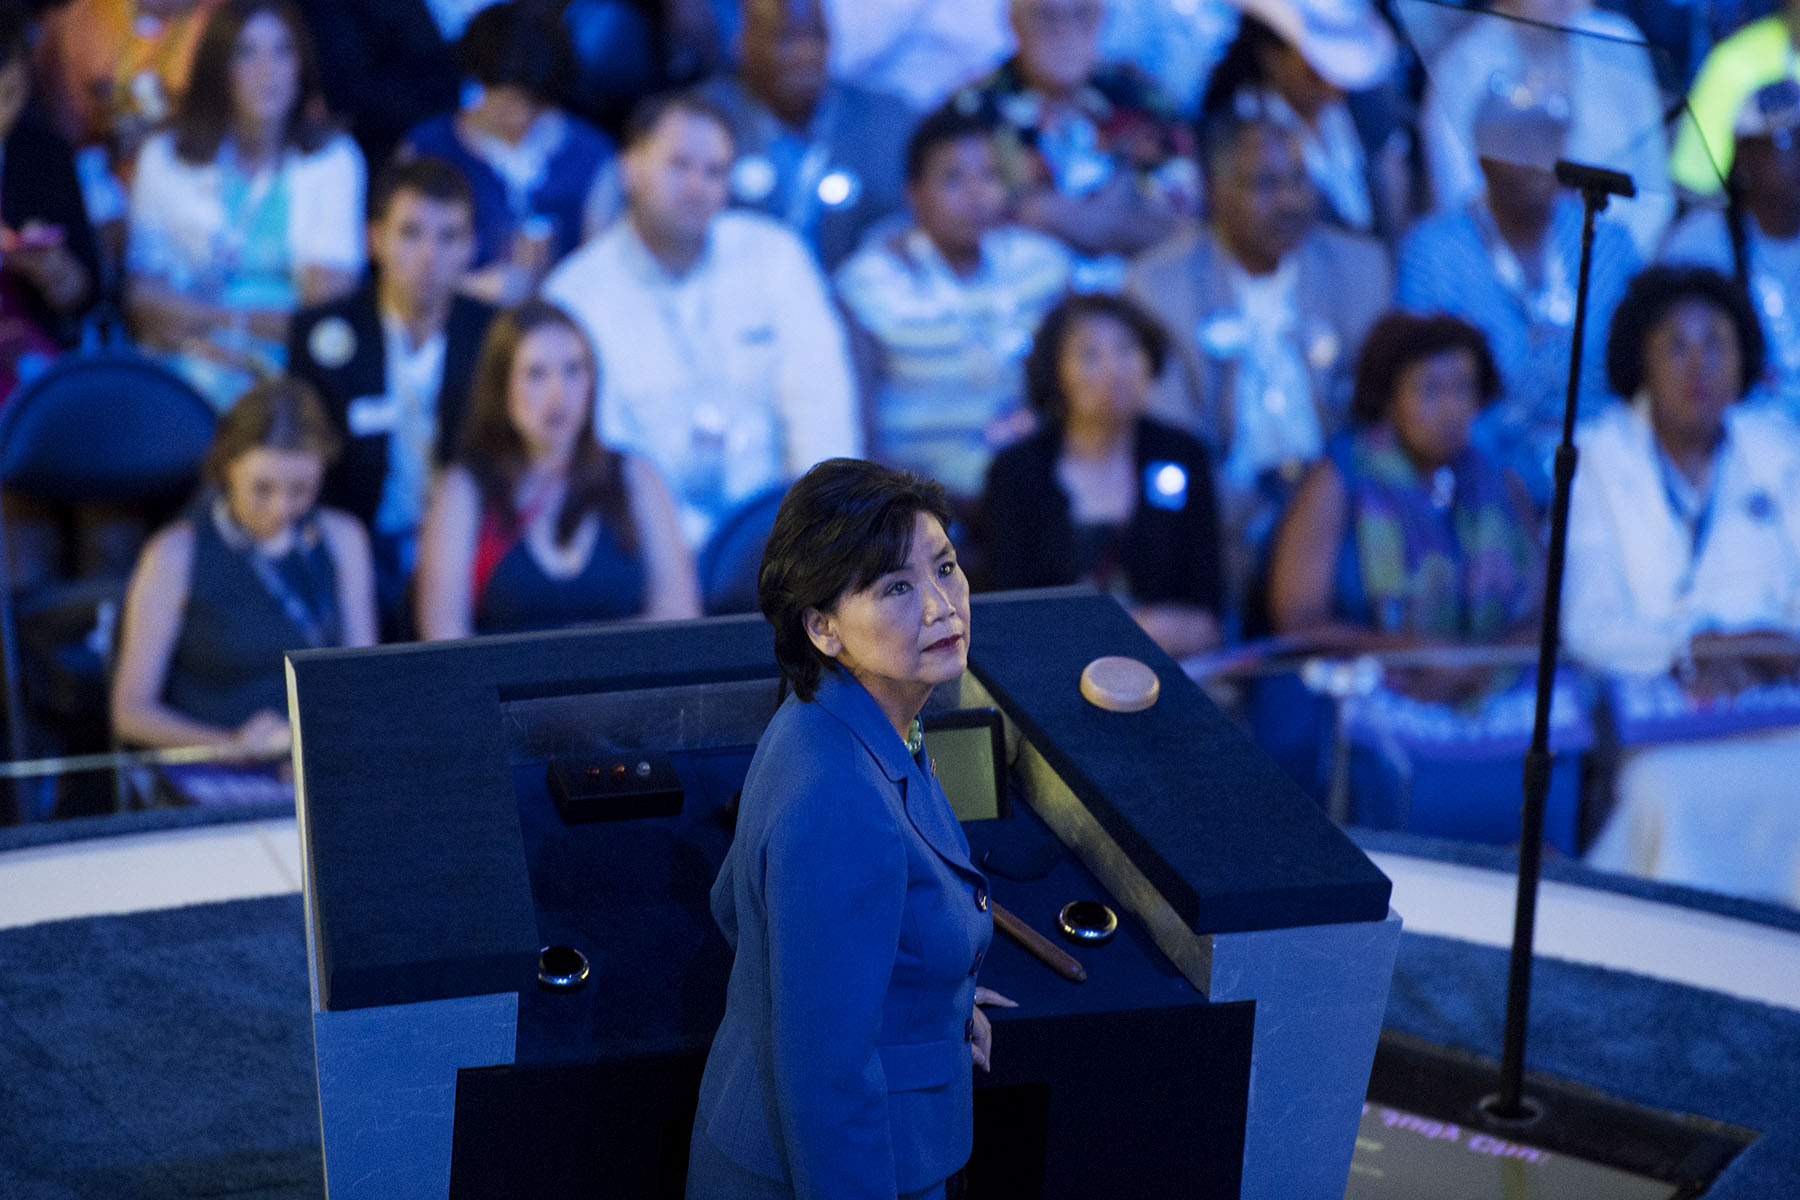 Rep. Judy Chu is seen on stage during the 2016 Democratic National Convention in Philadelphia.